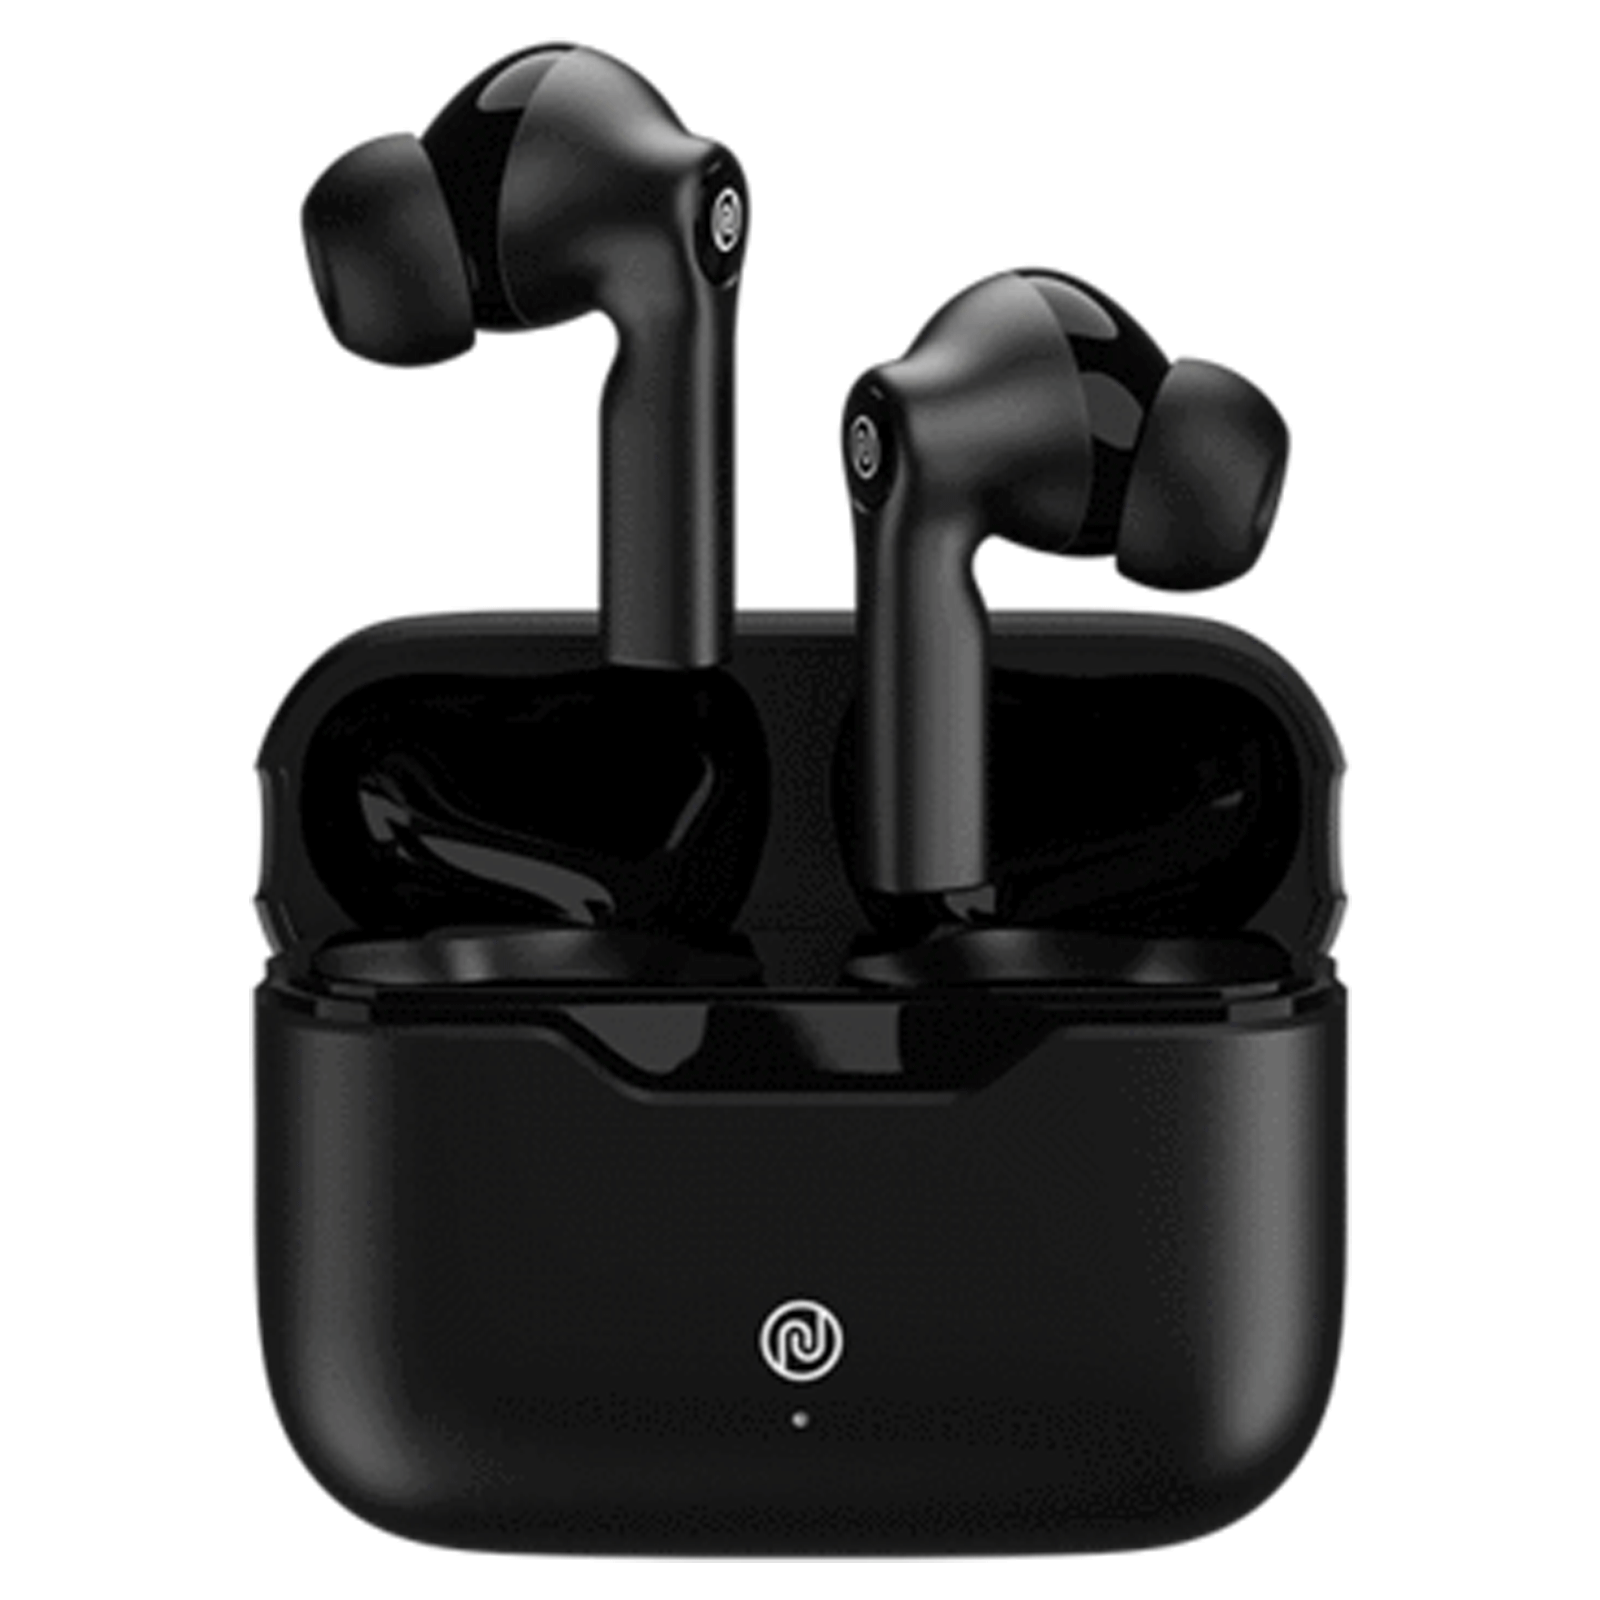 noise - noise Buds VS103 In-Ear Truly Wireless Earbuds with Mic (Bluetooth 5.0, Hyper Sync Technology, AUD-HDPHN-BUDSVS10, Jet Black)